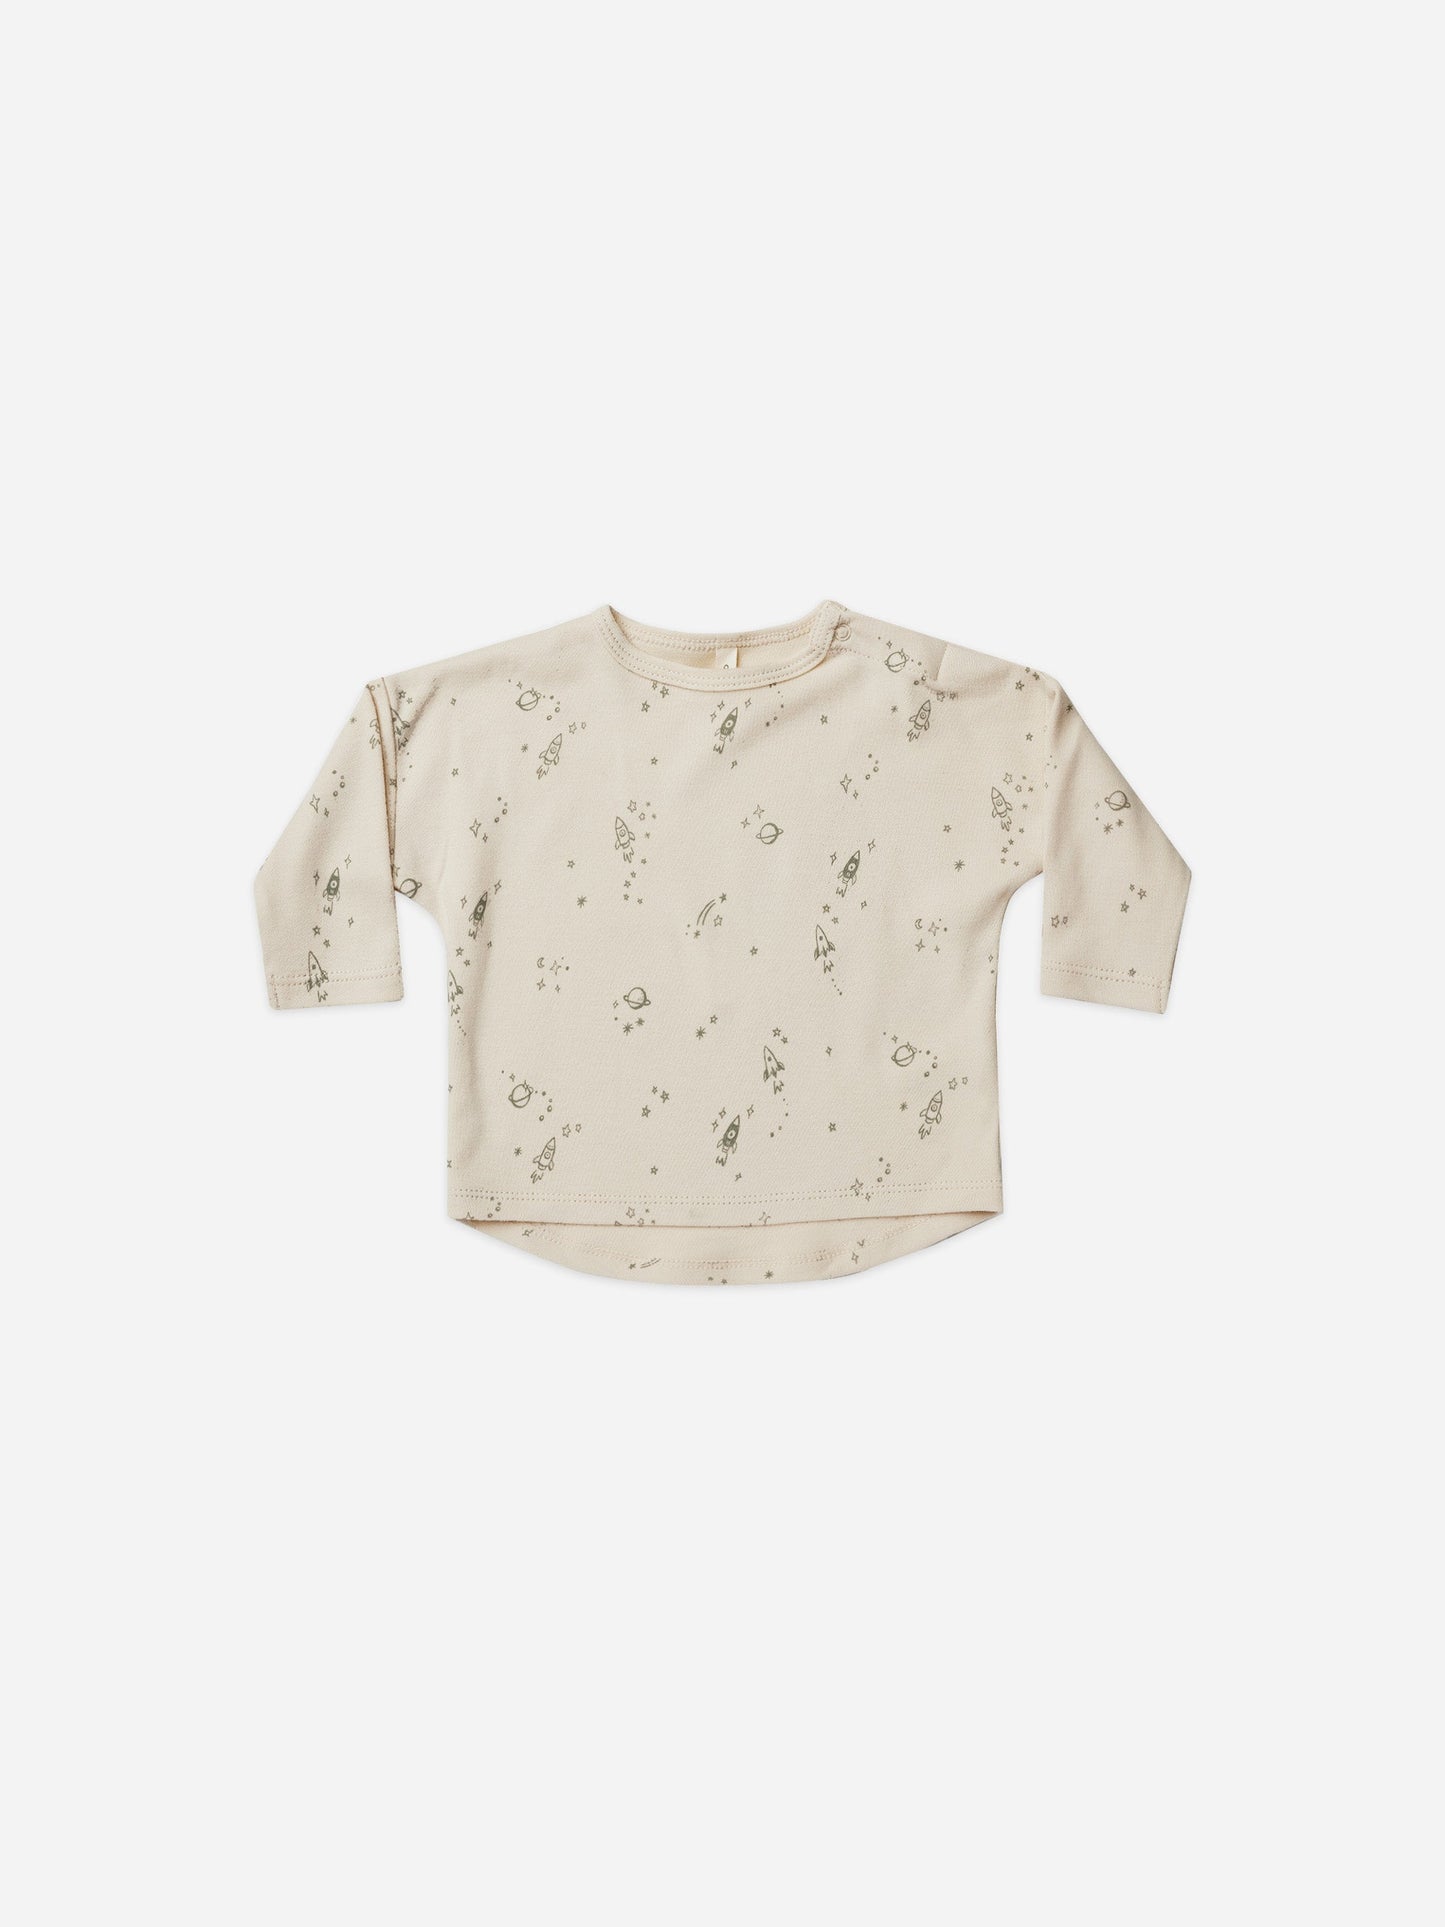 Quincy Mae infant space print tee